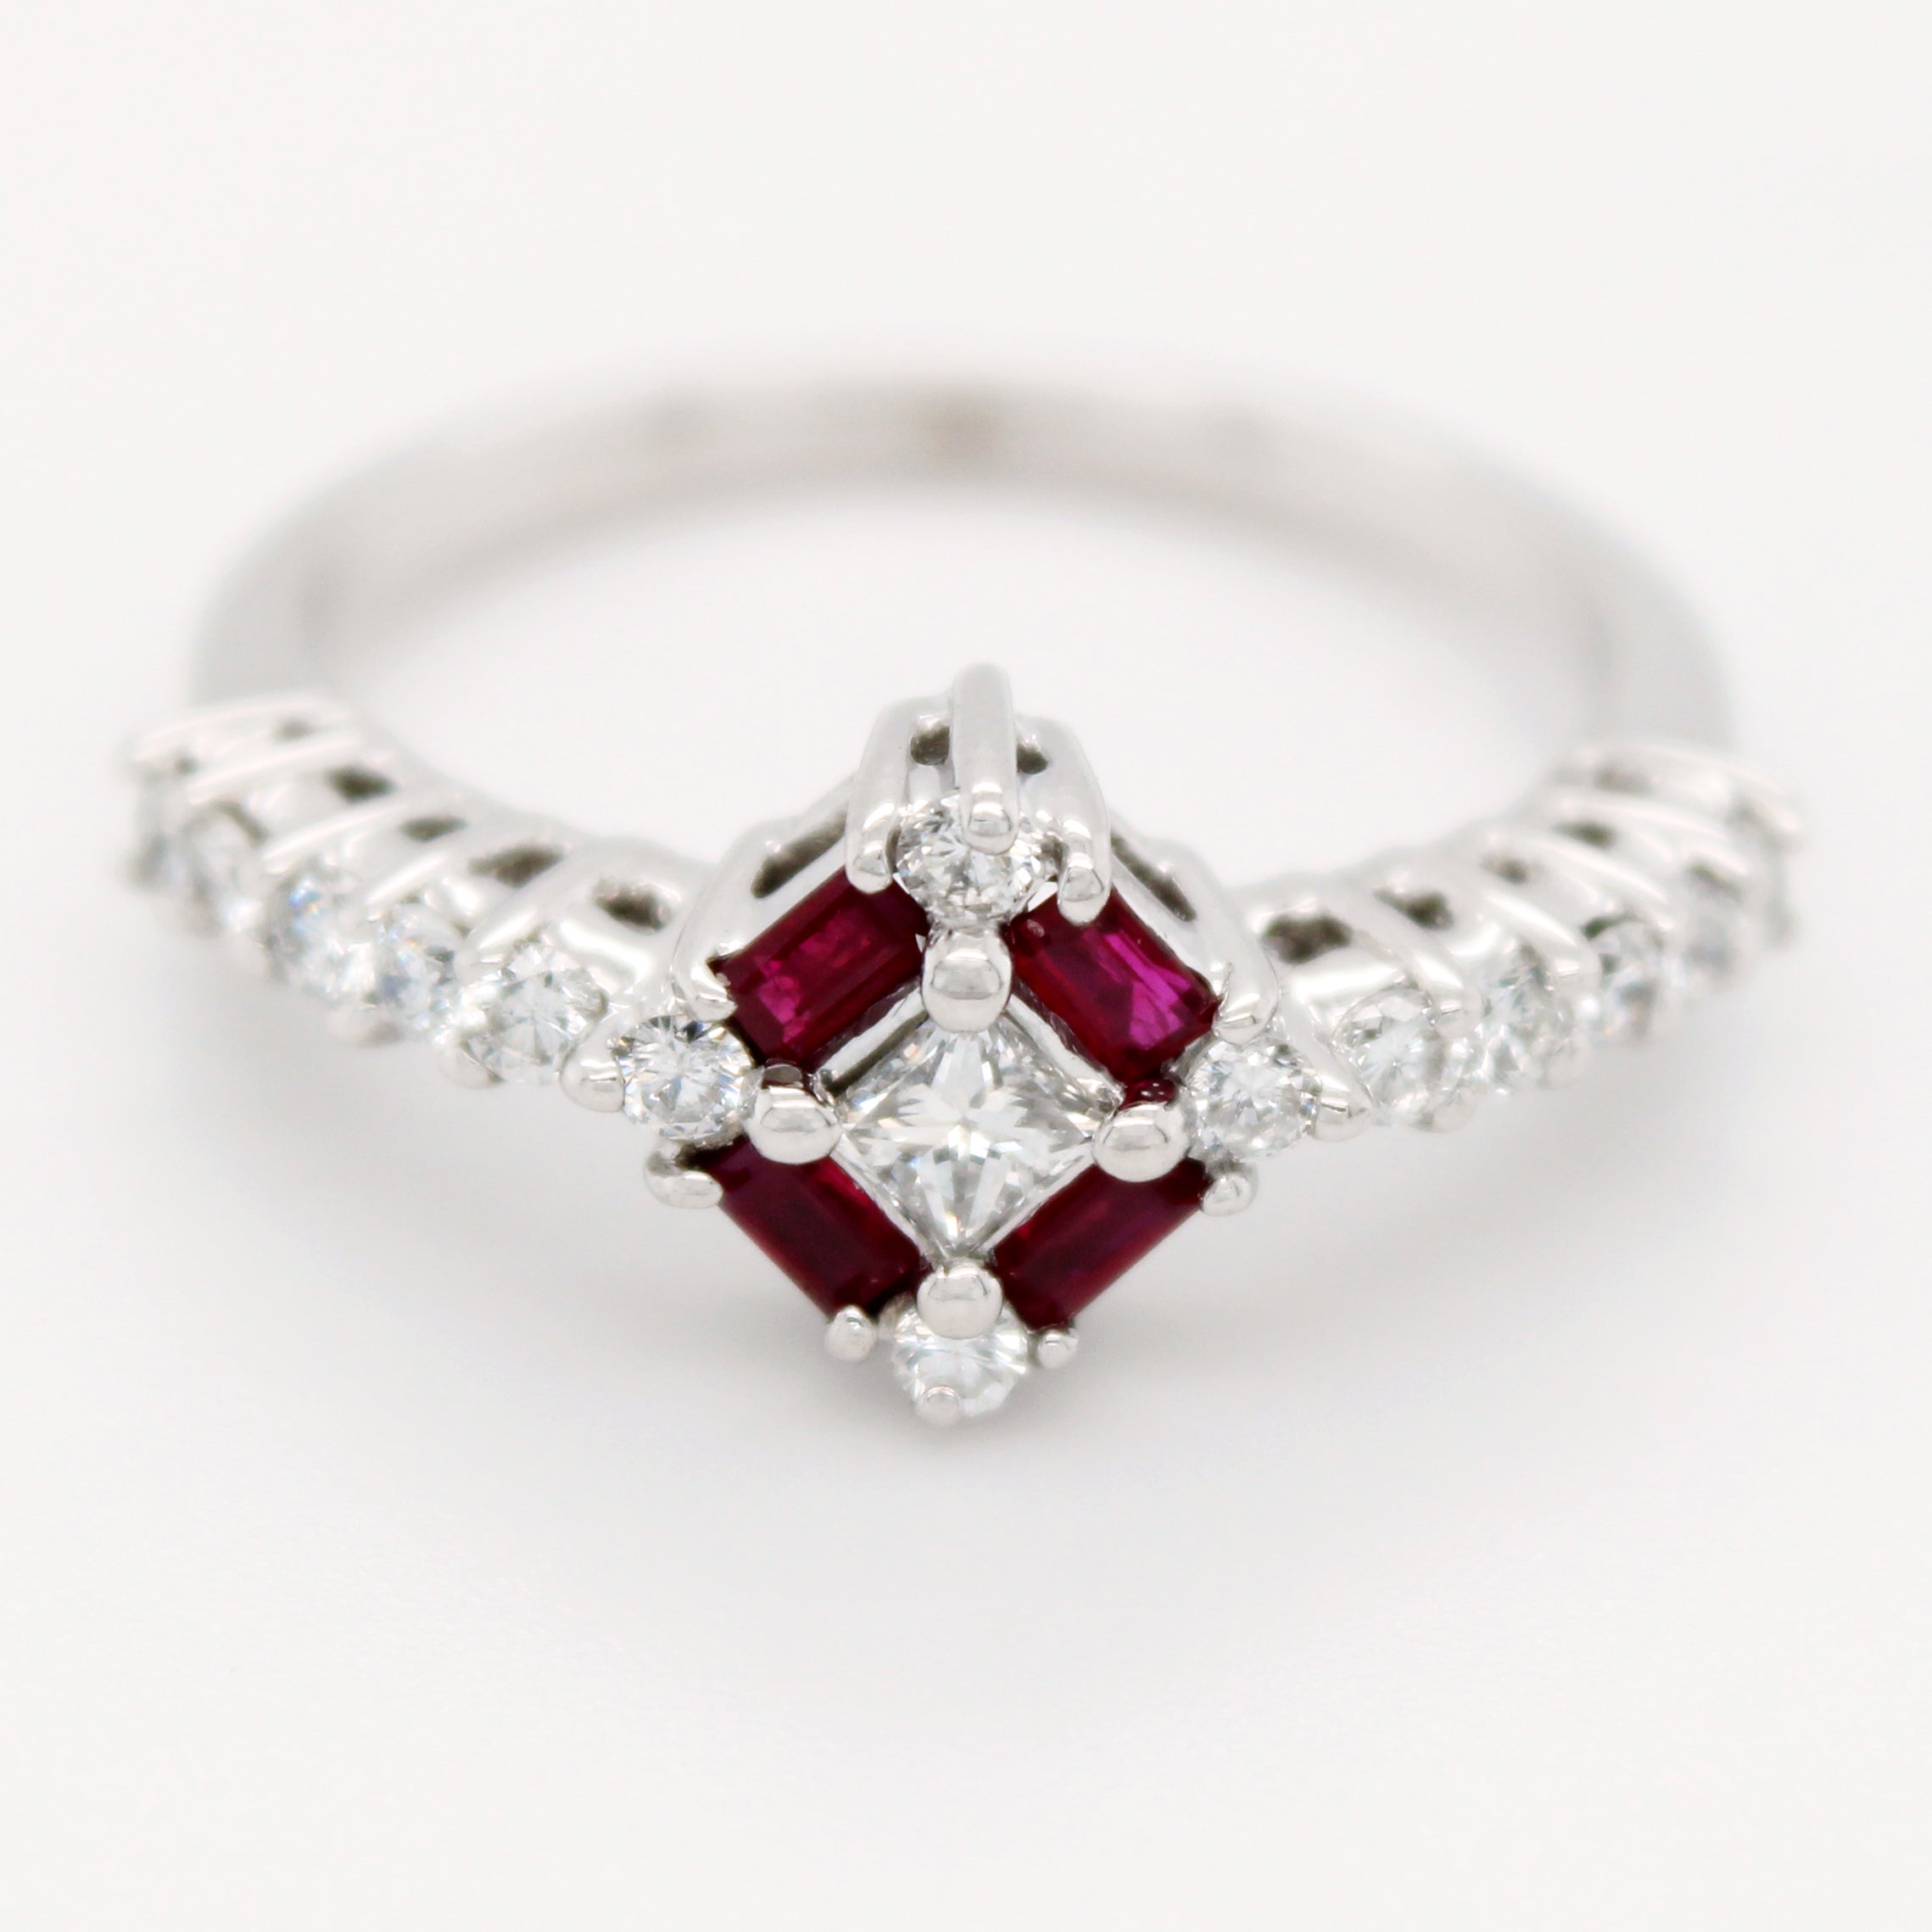 Vintage 0.20ctw Ruby & Diamond Band Ring in 14k White Gold | Size 6